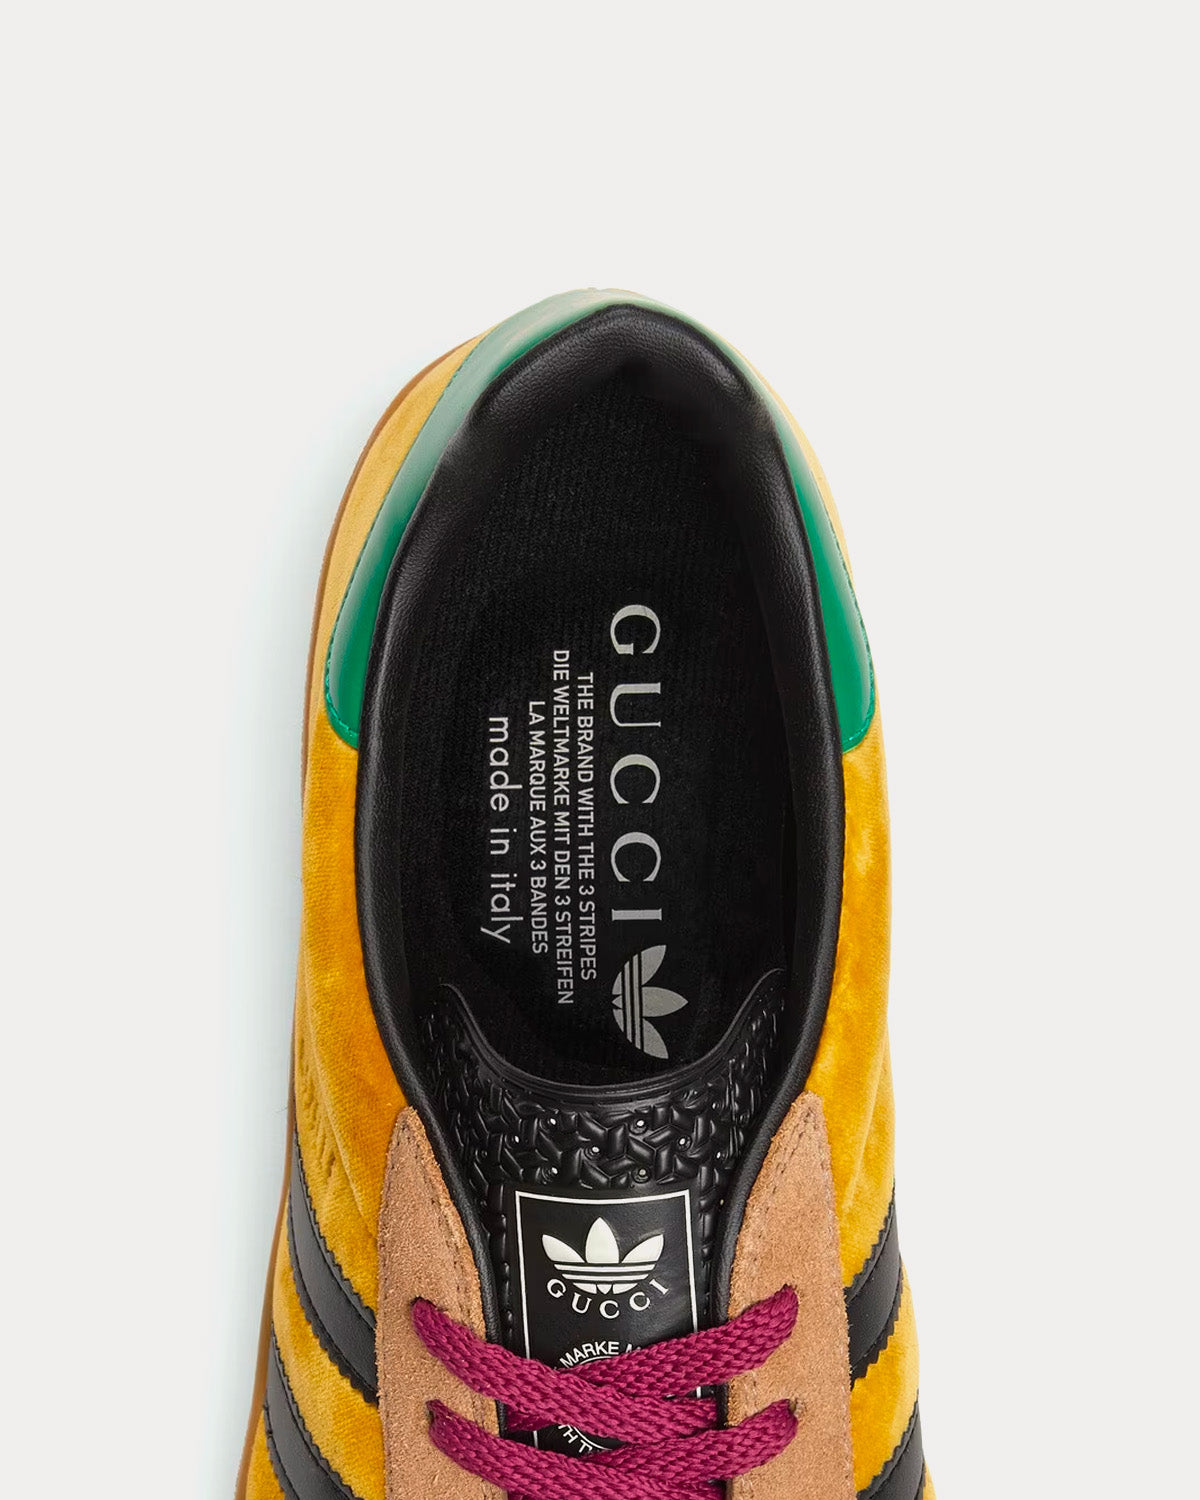 Adidas x Gucci - Gazelle Yellow velvet with Beige Suede Low Top Sneakers